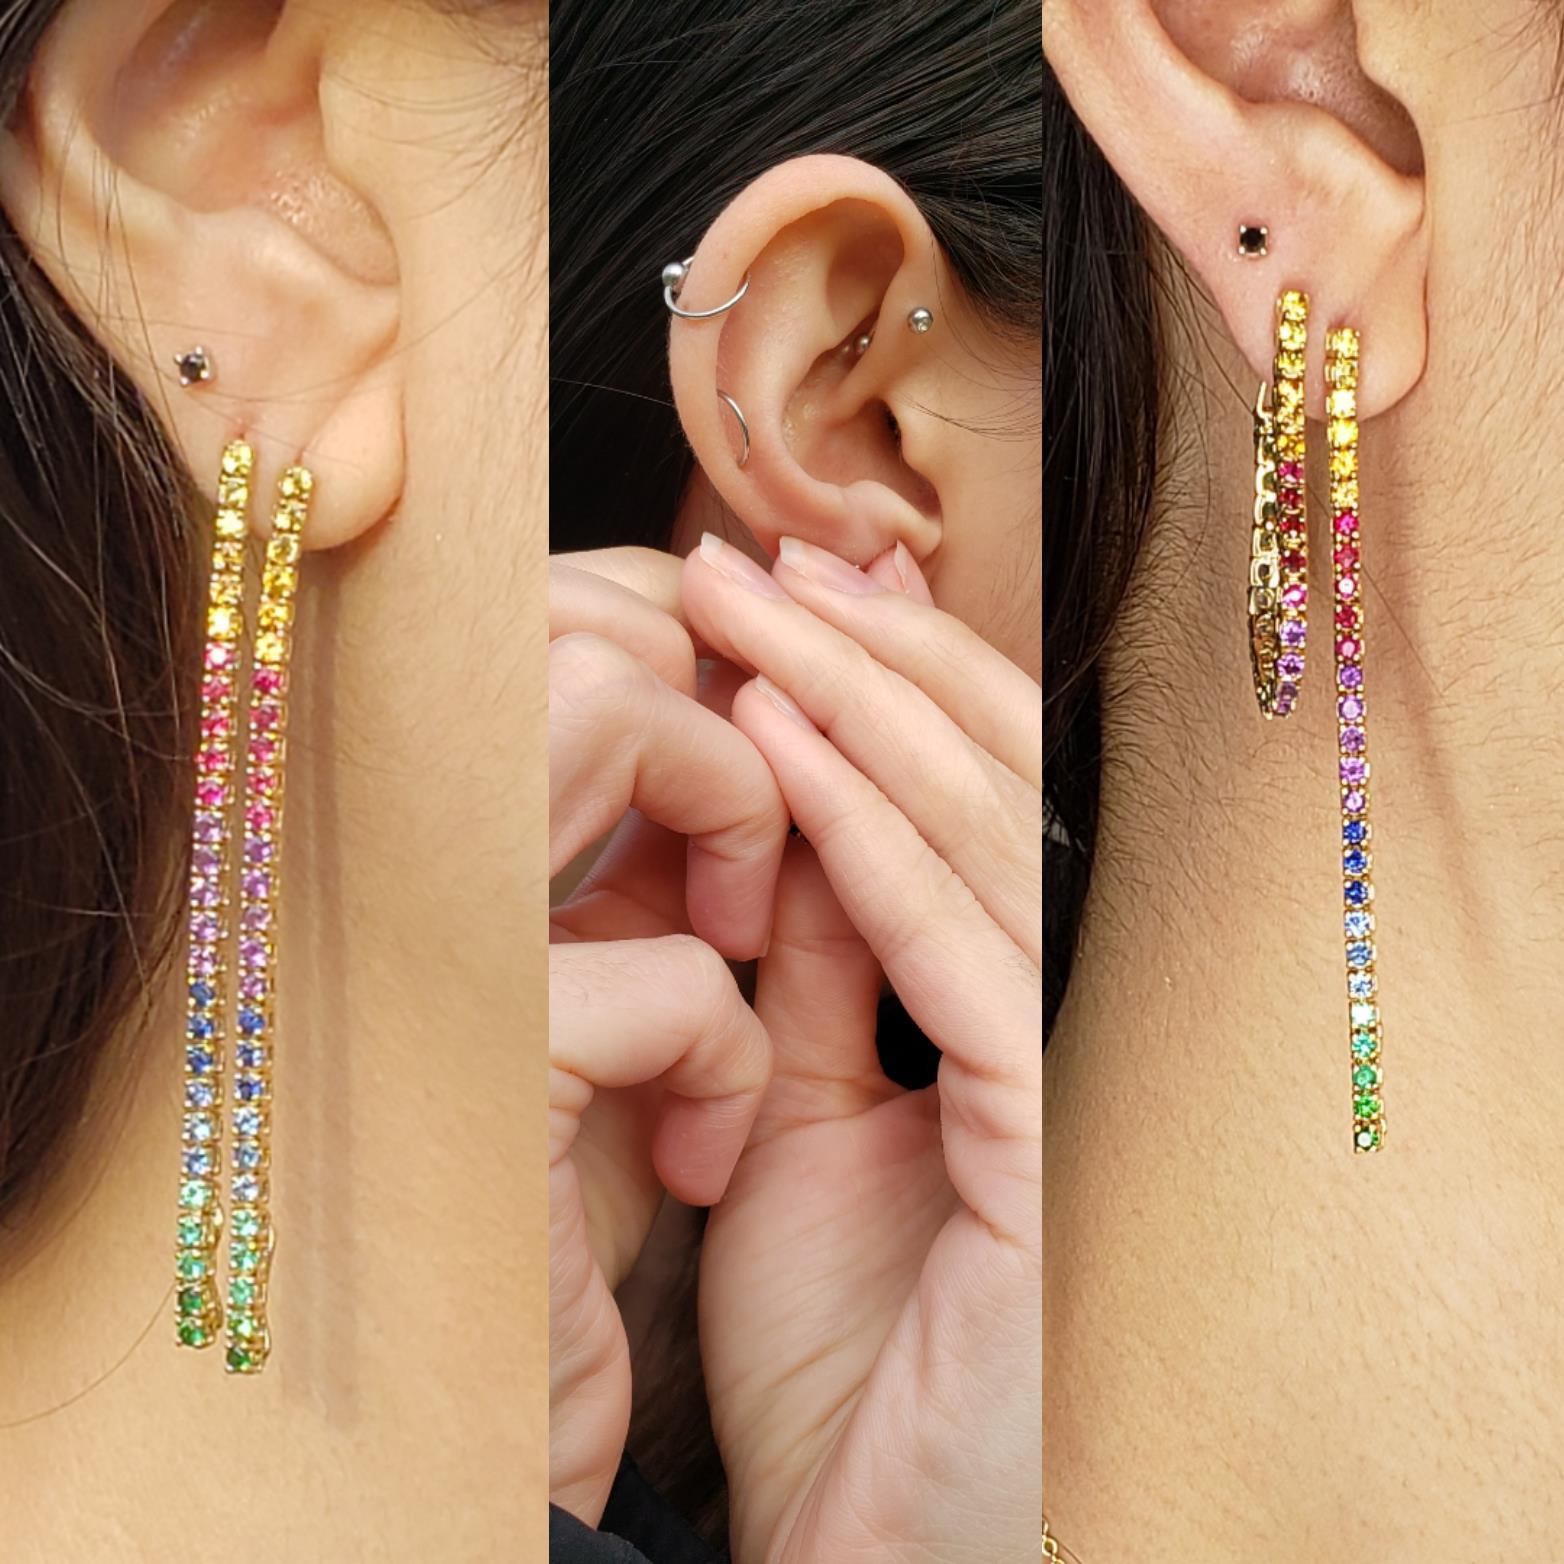 Modernist Convertible Flexible Tennis Earrings in Rainbow Gemstones can change into Hoops For Sale